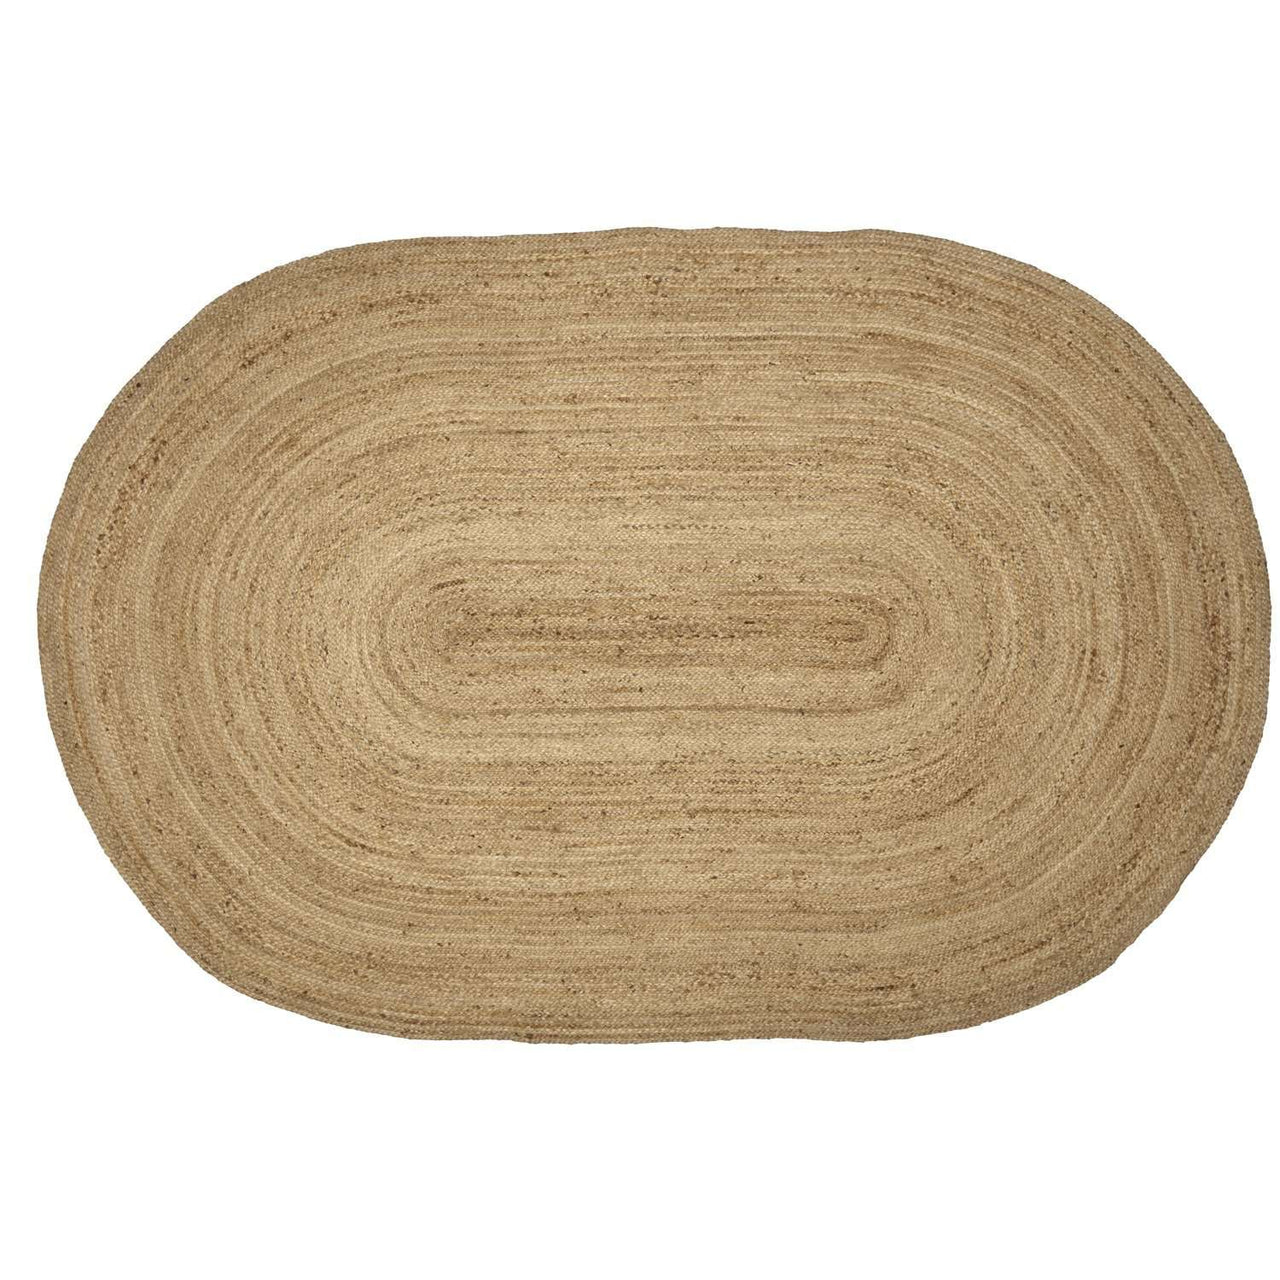 Natural Jute Rugs Oval VHC Brands Rugs VHC Brands 